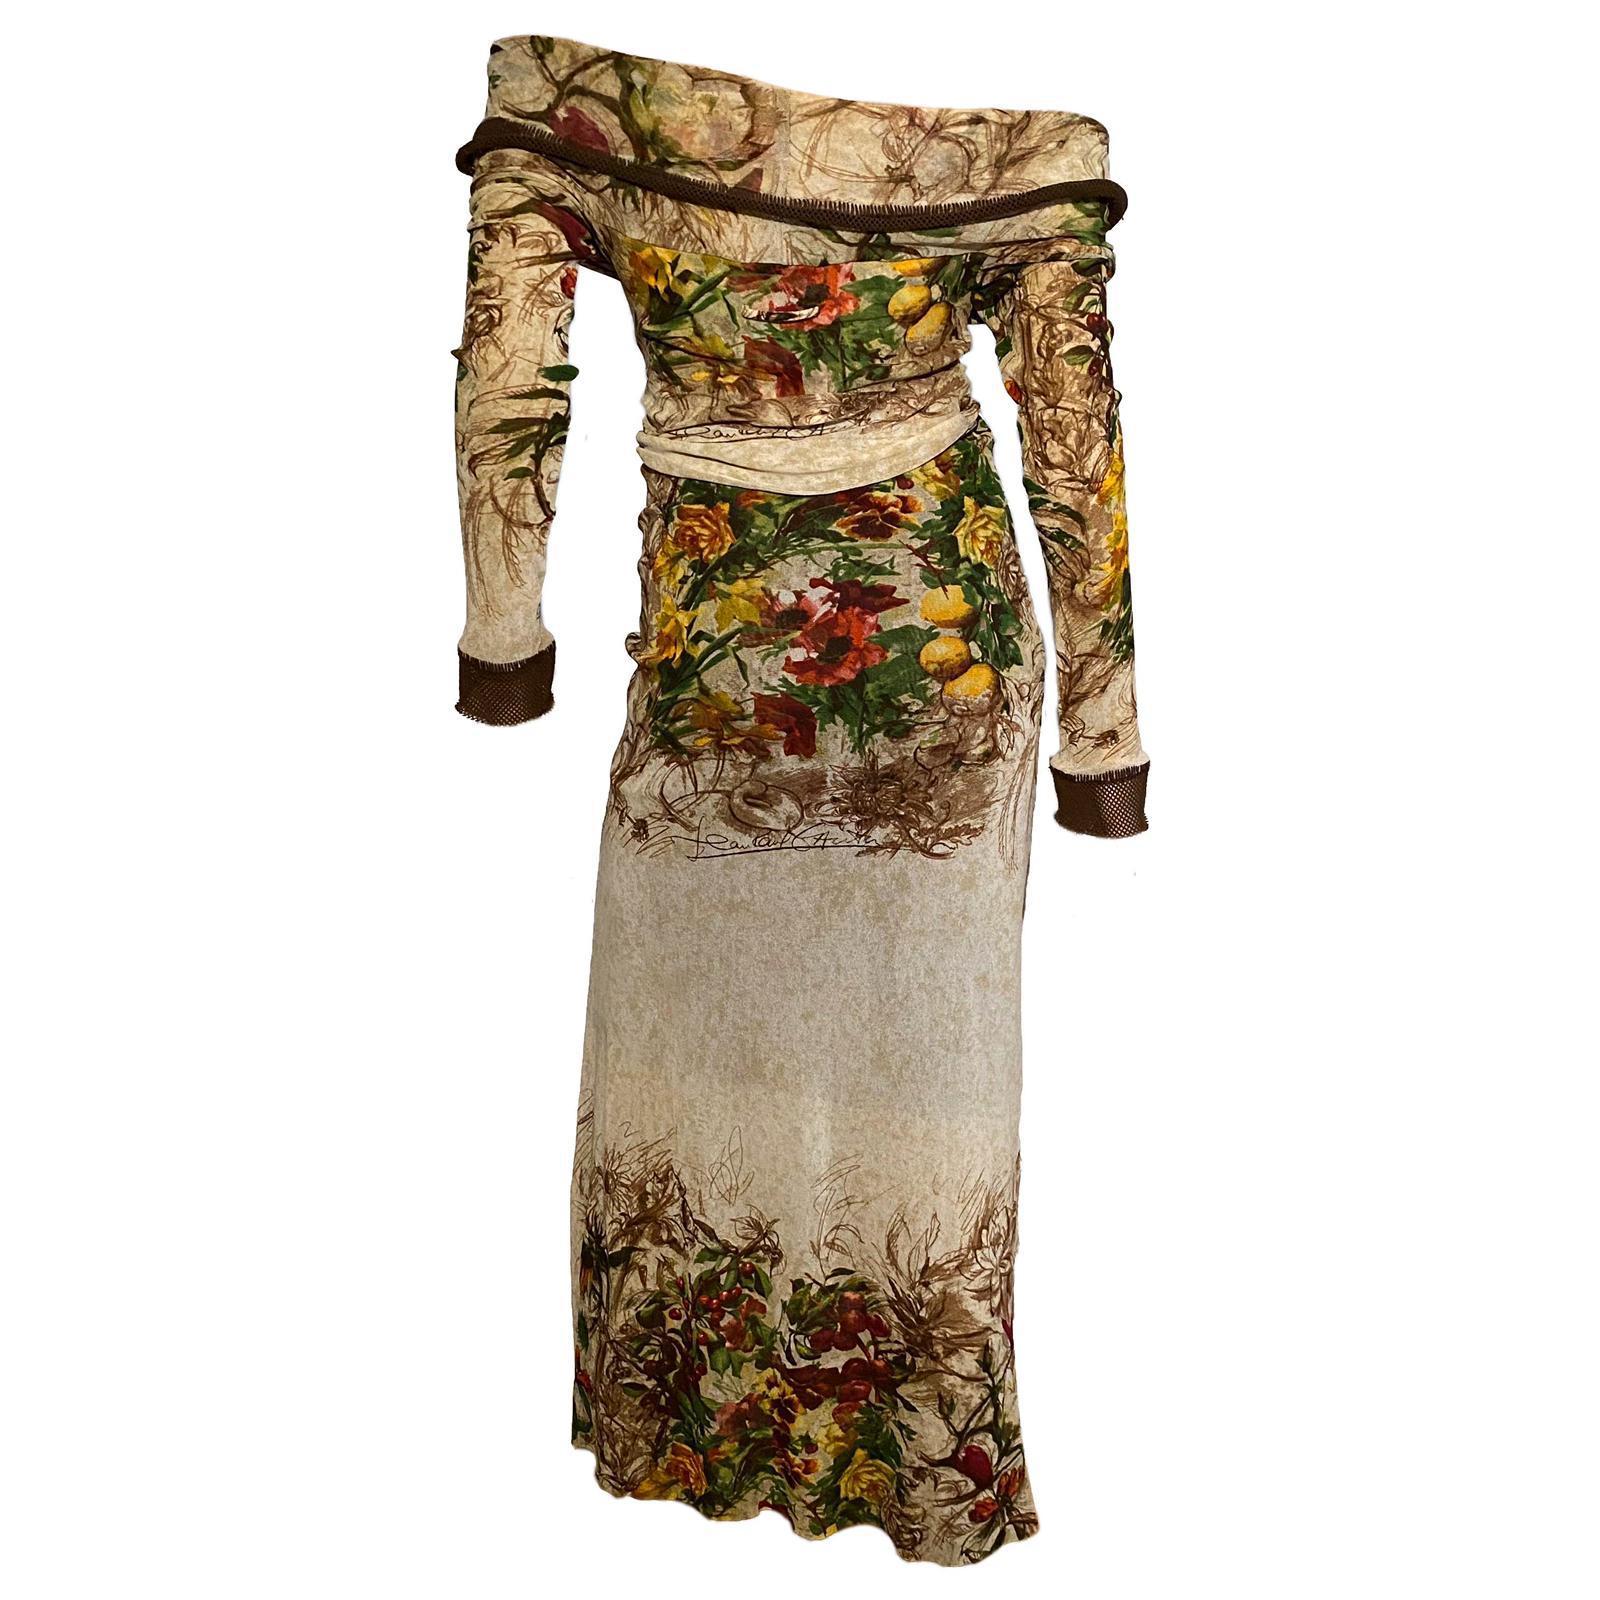 Jean Paul Gaultier flower print maxi dress from the S/S 1999 collection, worn by Devon Aoki. Long sleeves with crochet cuffs, meant to be worn off the shoulders. Brown inner petticoat.
Size label removed, fits S to bigger sizes